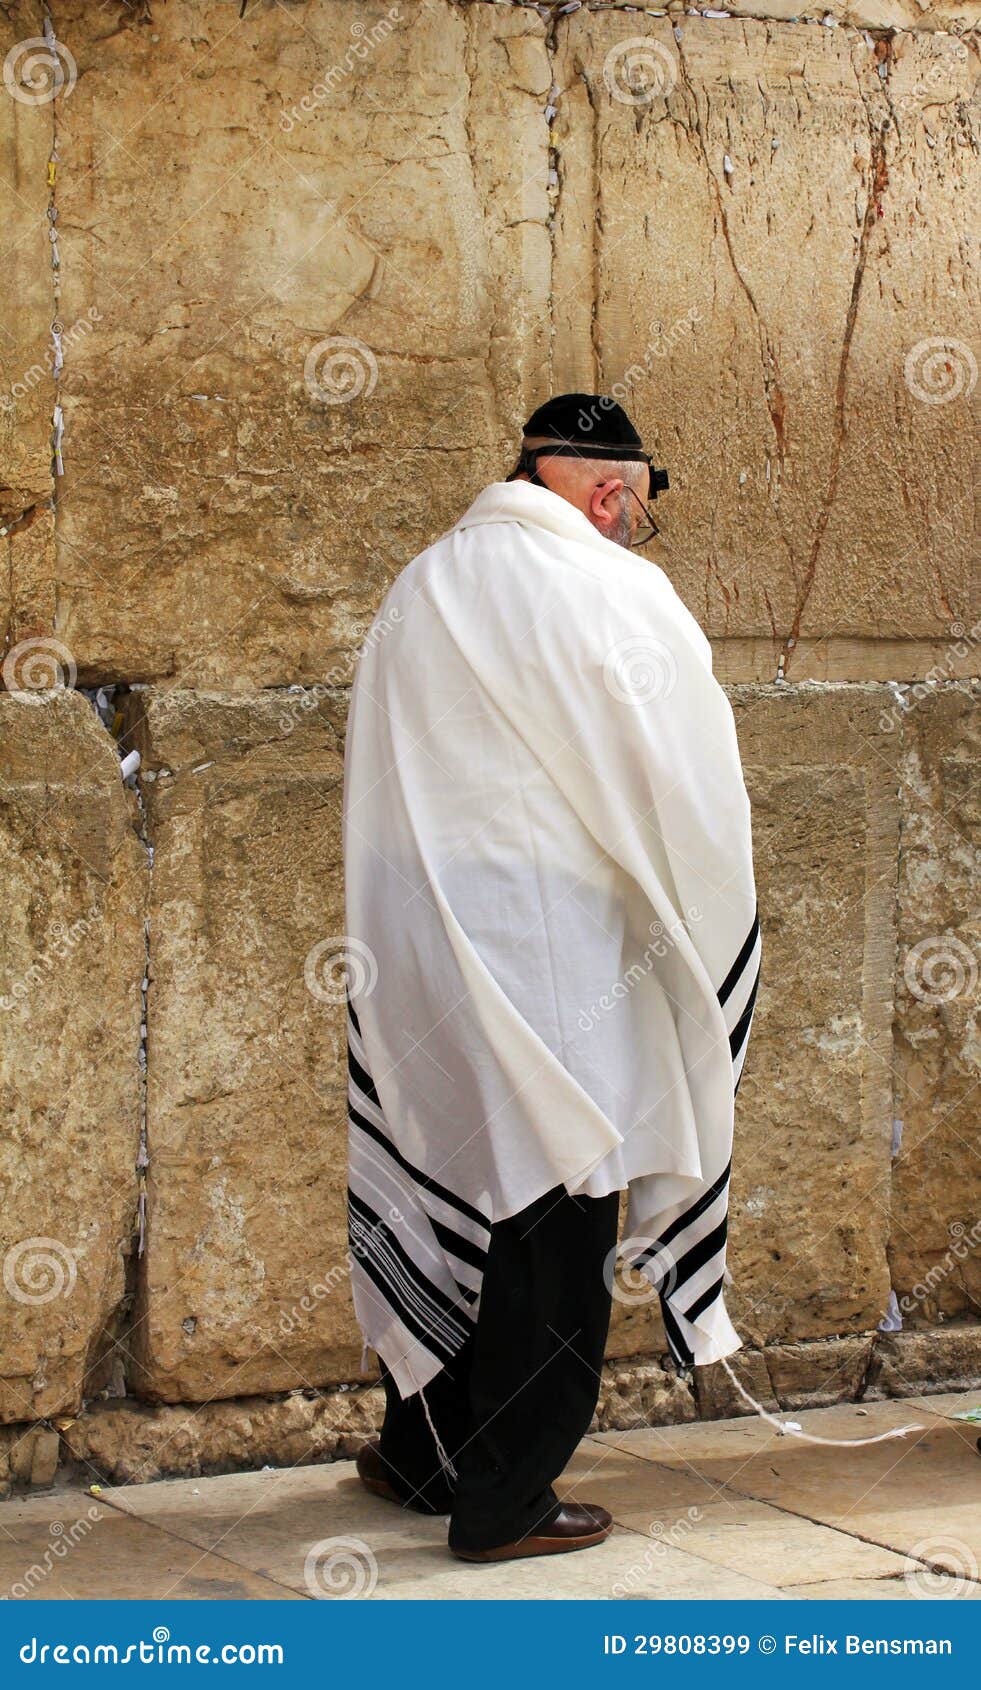 Unidentified Old Man In Tefillin Praying At The Wailing Wall (Western ...